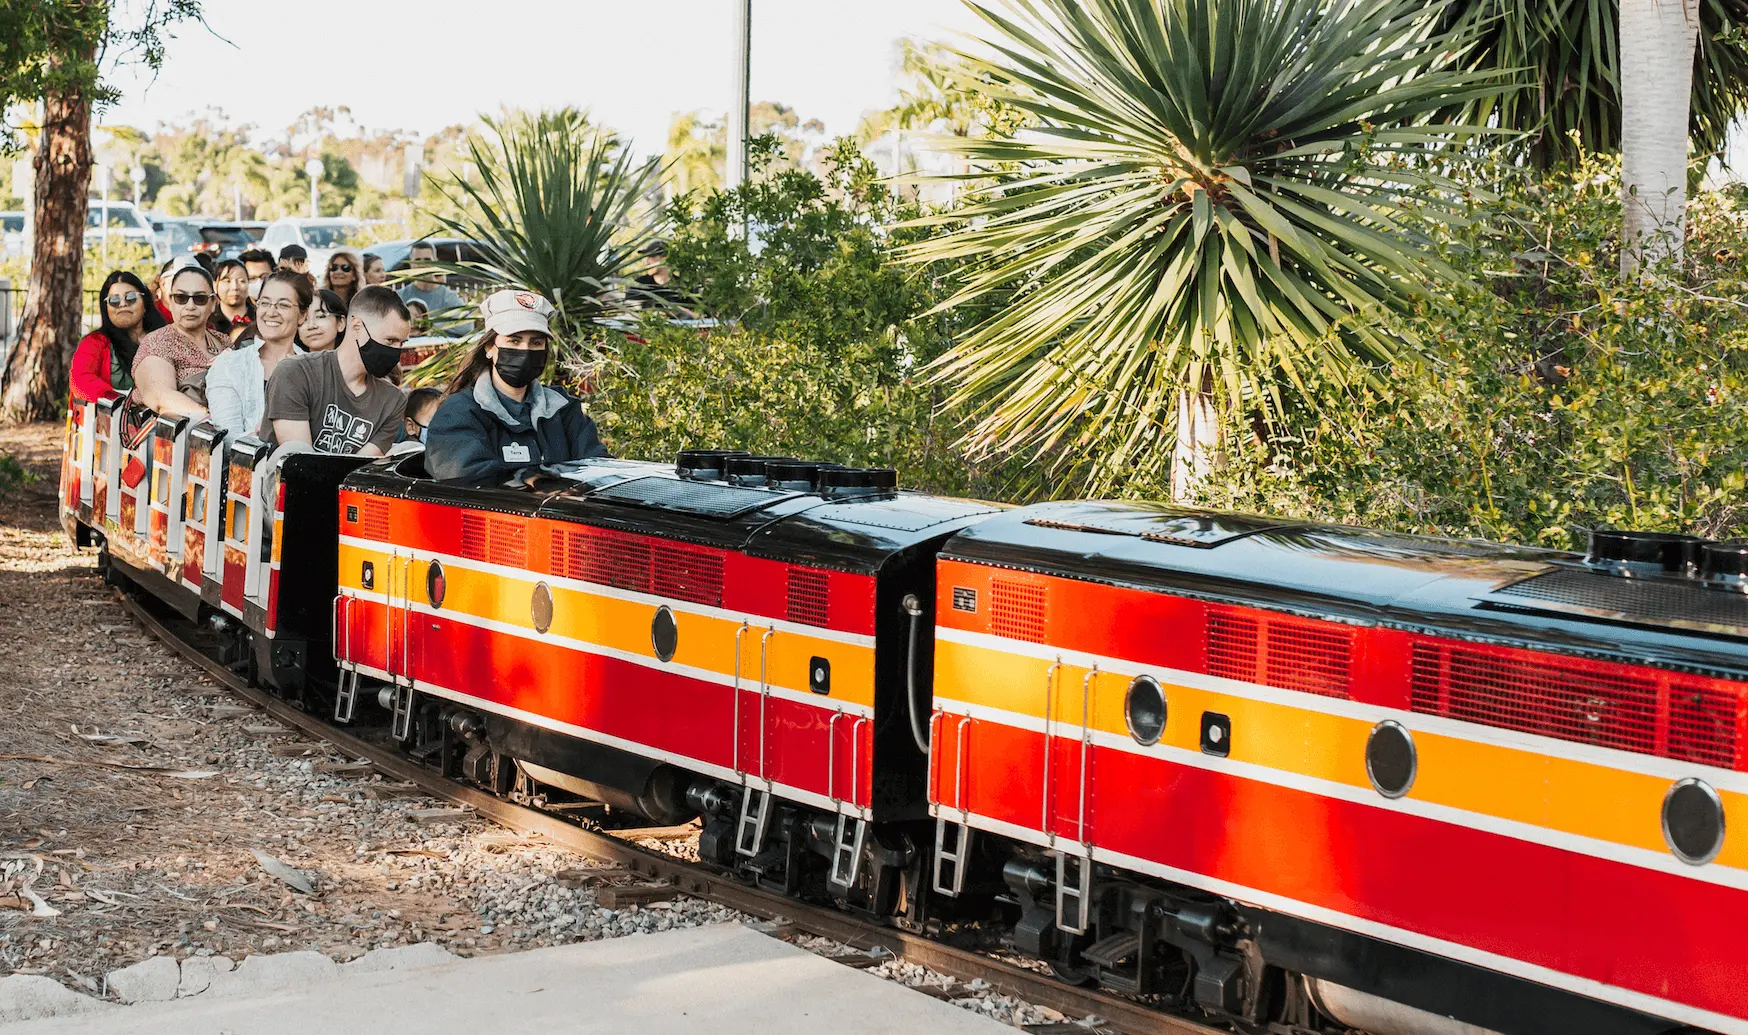 A red, orange, and white minature train is coming around a turn. The train operator is in the front with groups of adult and child passengers in the train cars behind them.